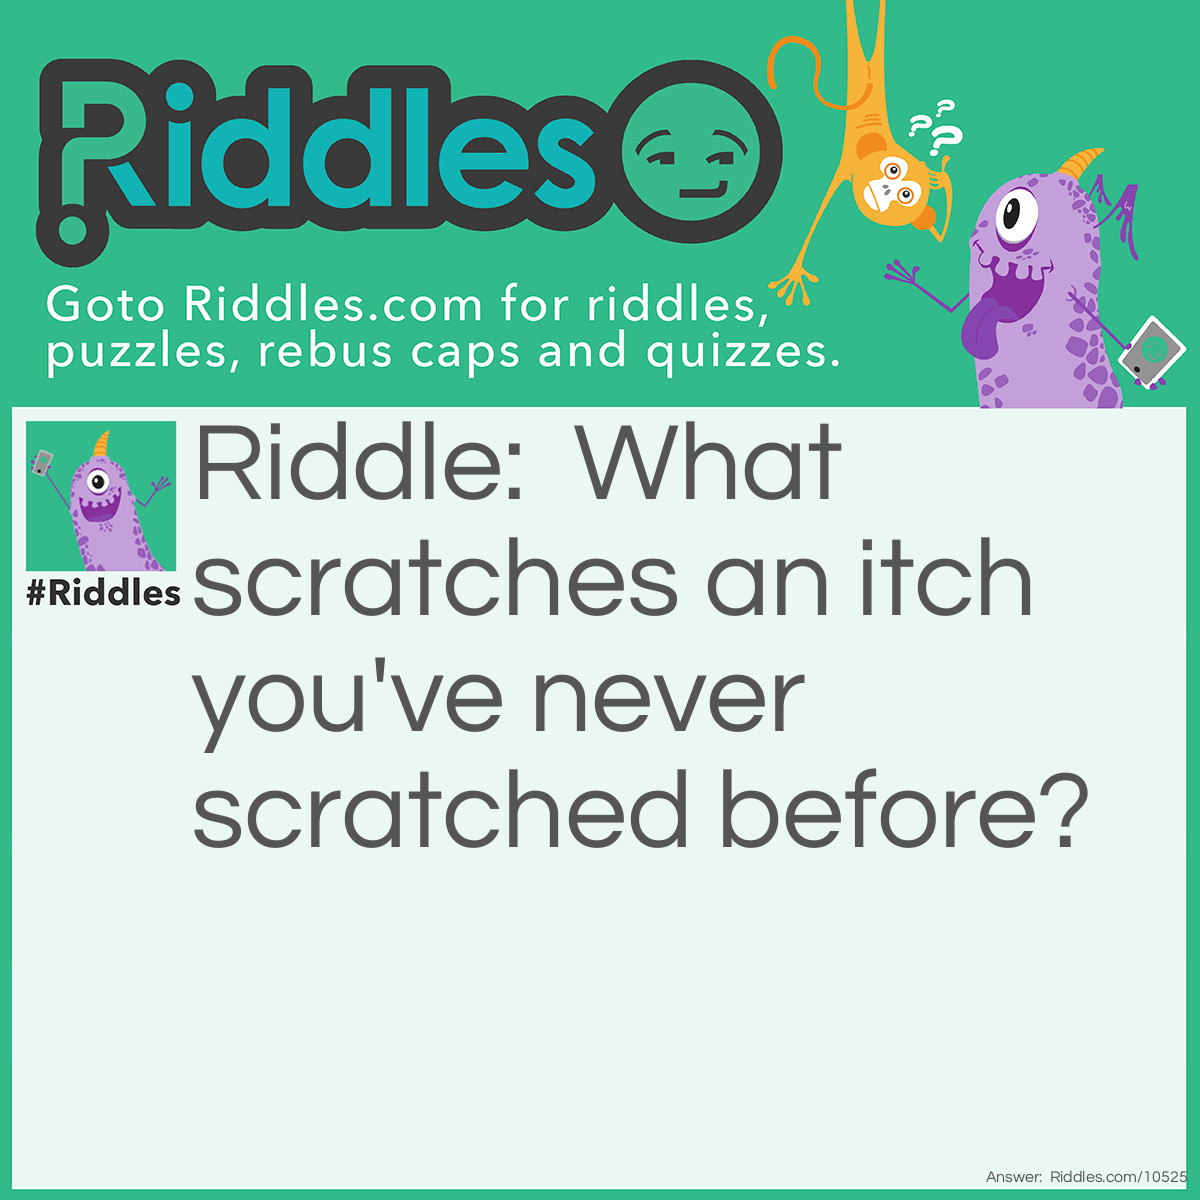 Riddle: What scratches an itch you've never scratched before? Answer: A bidet!